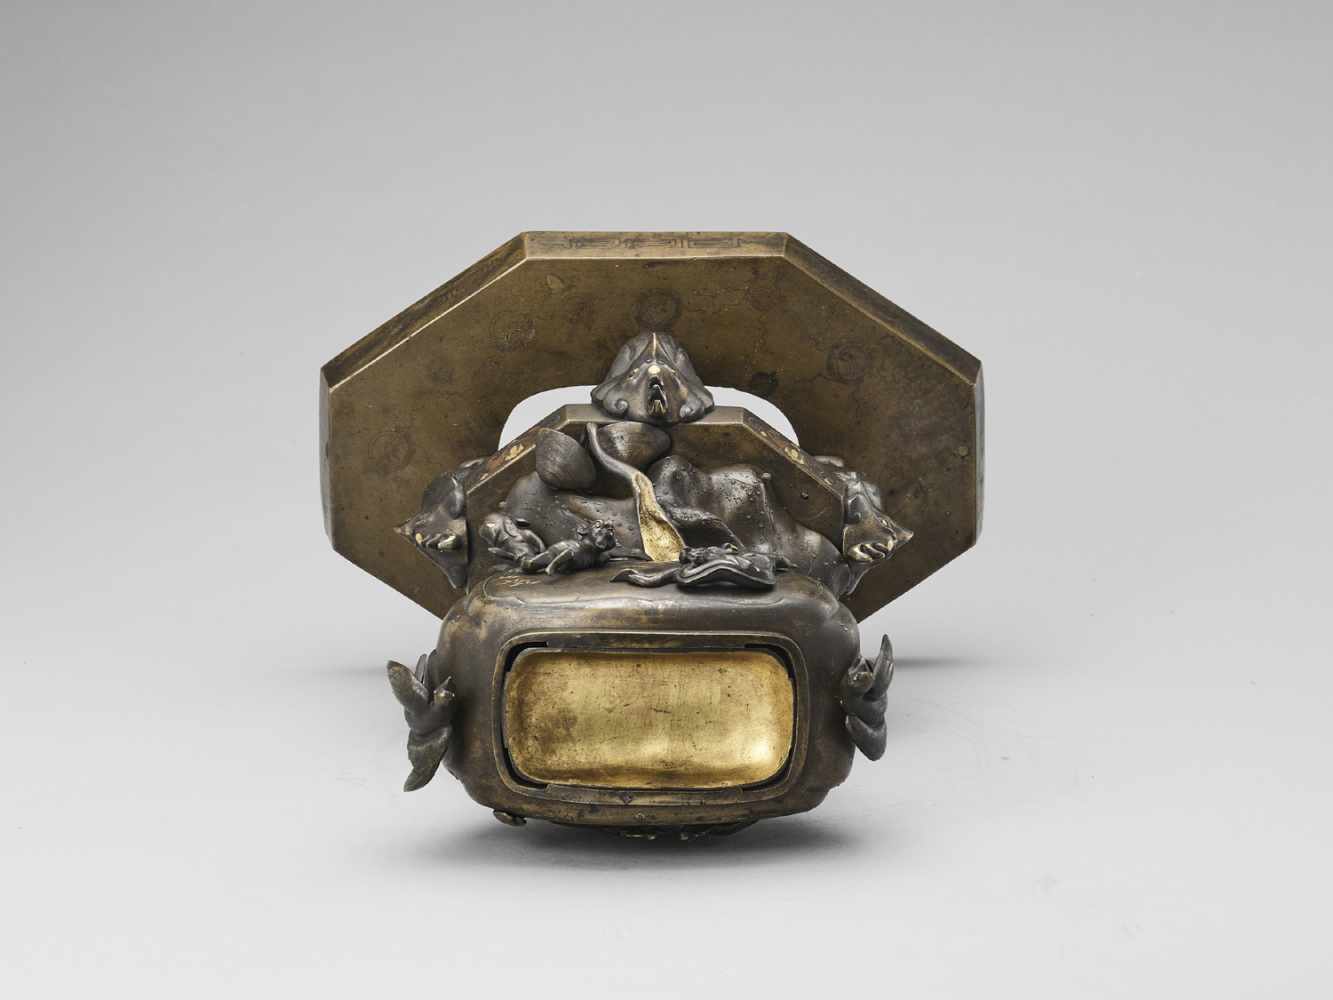 A LARGE AND SPECTACULAR SILVER AND GOLD INLAID KORO (INCENSE BURNER) - Image 14 of 14